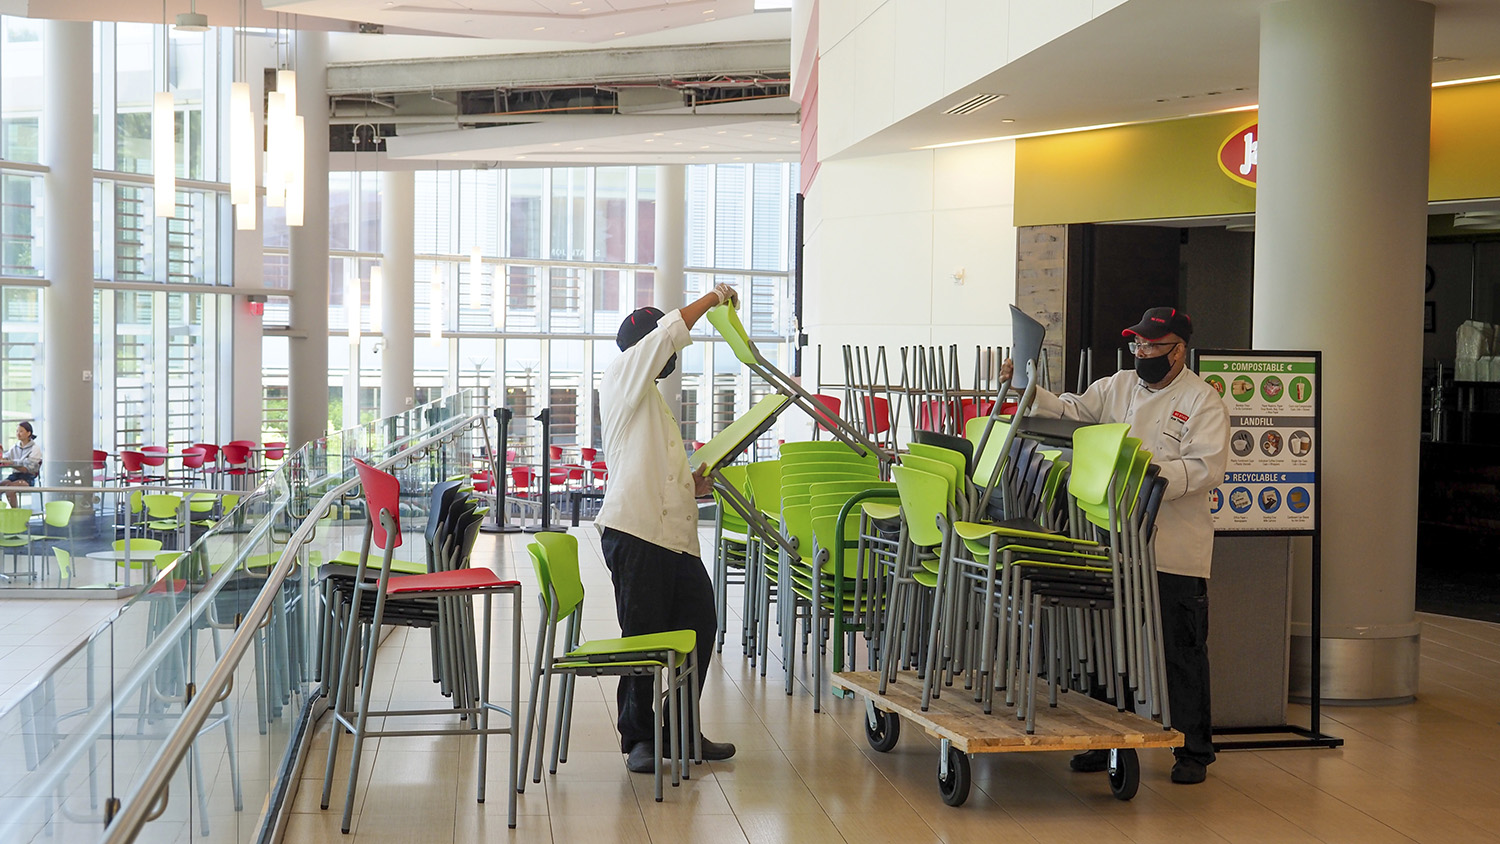 Workers remove green chairs from Talley Student Union to limit seating capacity during the COVID-19 pandemic.